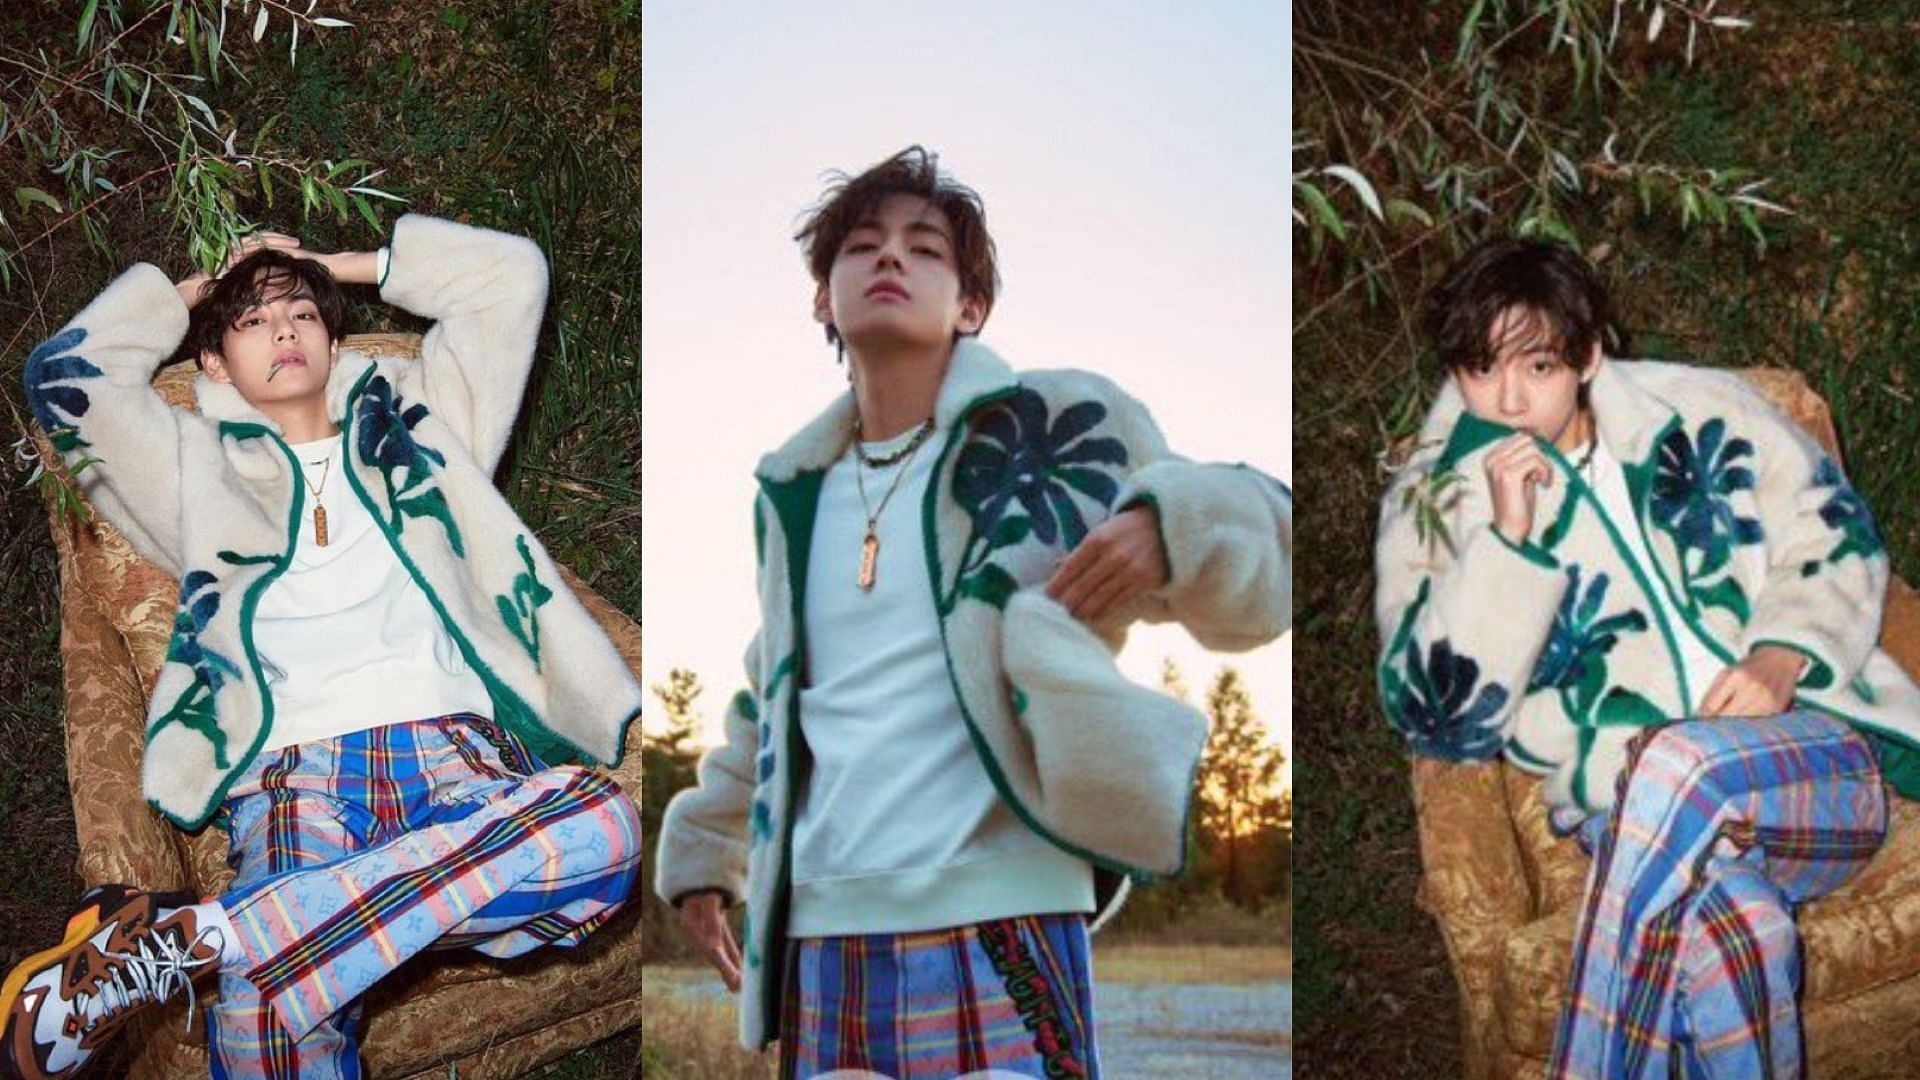 V looking debonair in his oversized floral jacket (Images via Vogue and GQ)